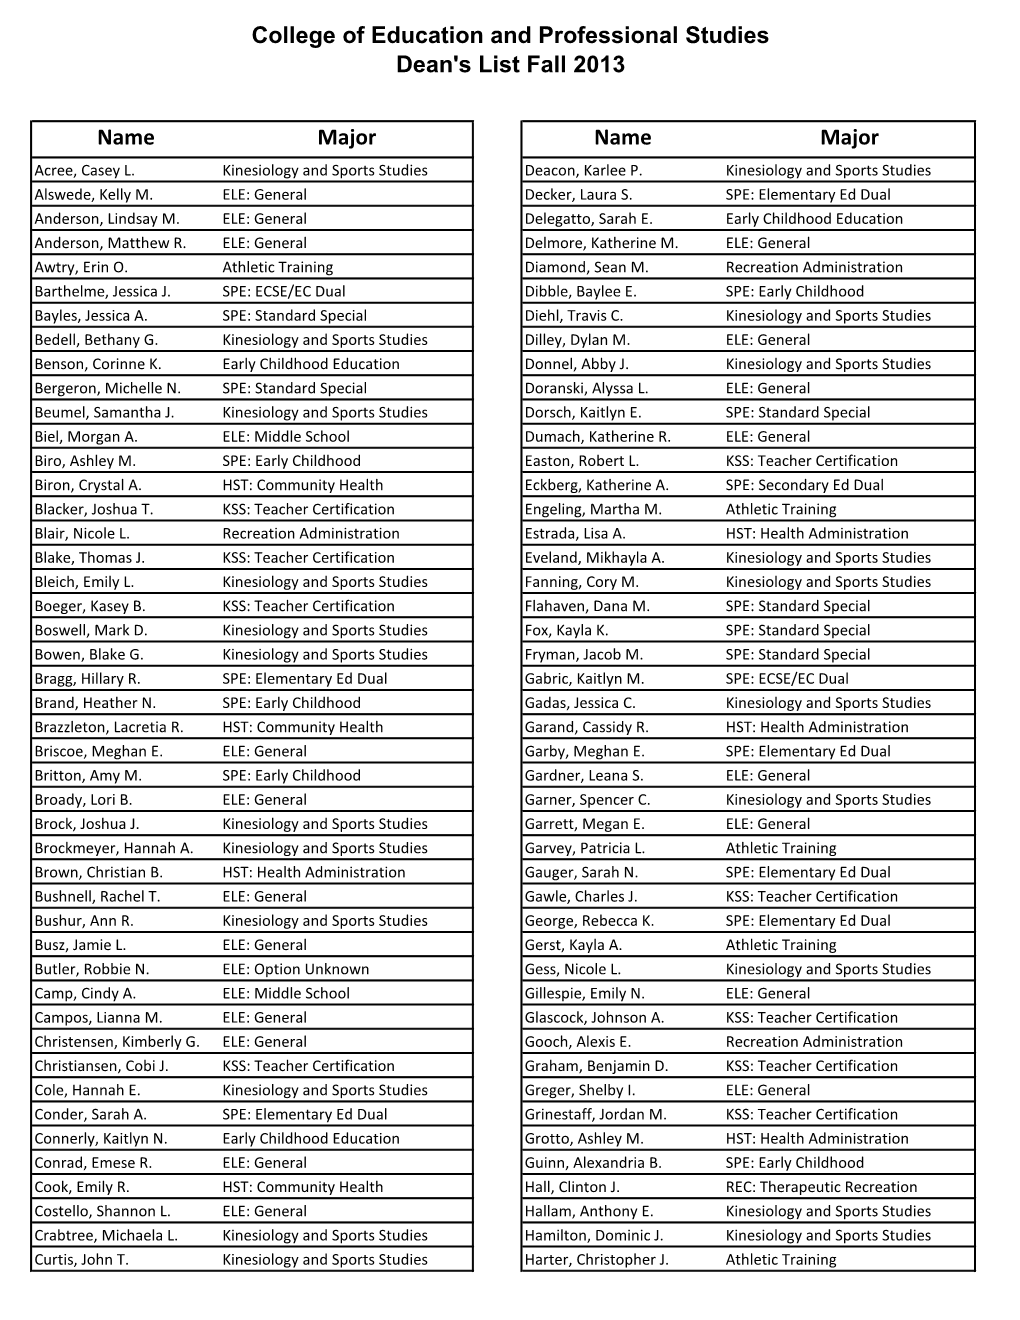 College of Education and Professional Studies Dean's List Fall 2013